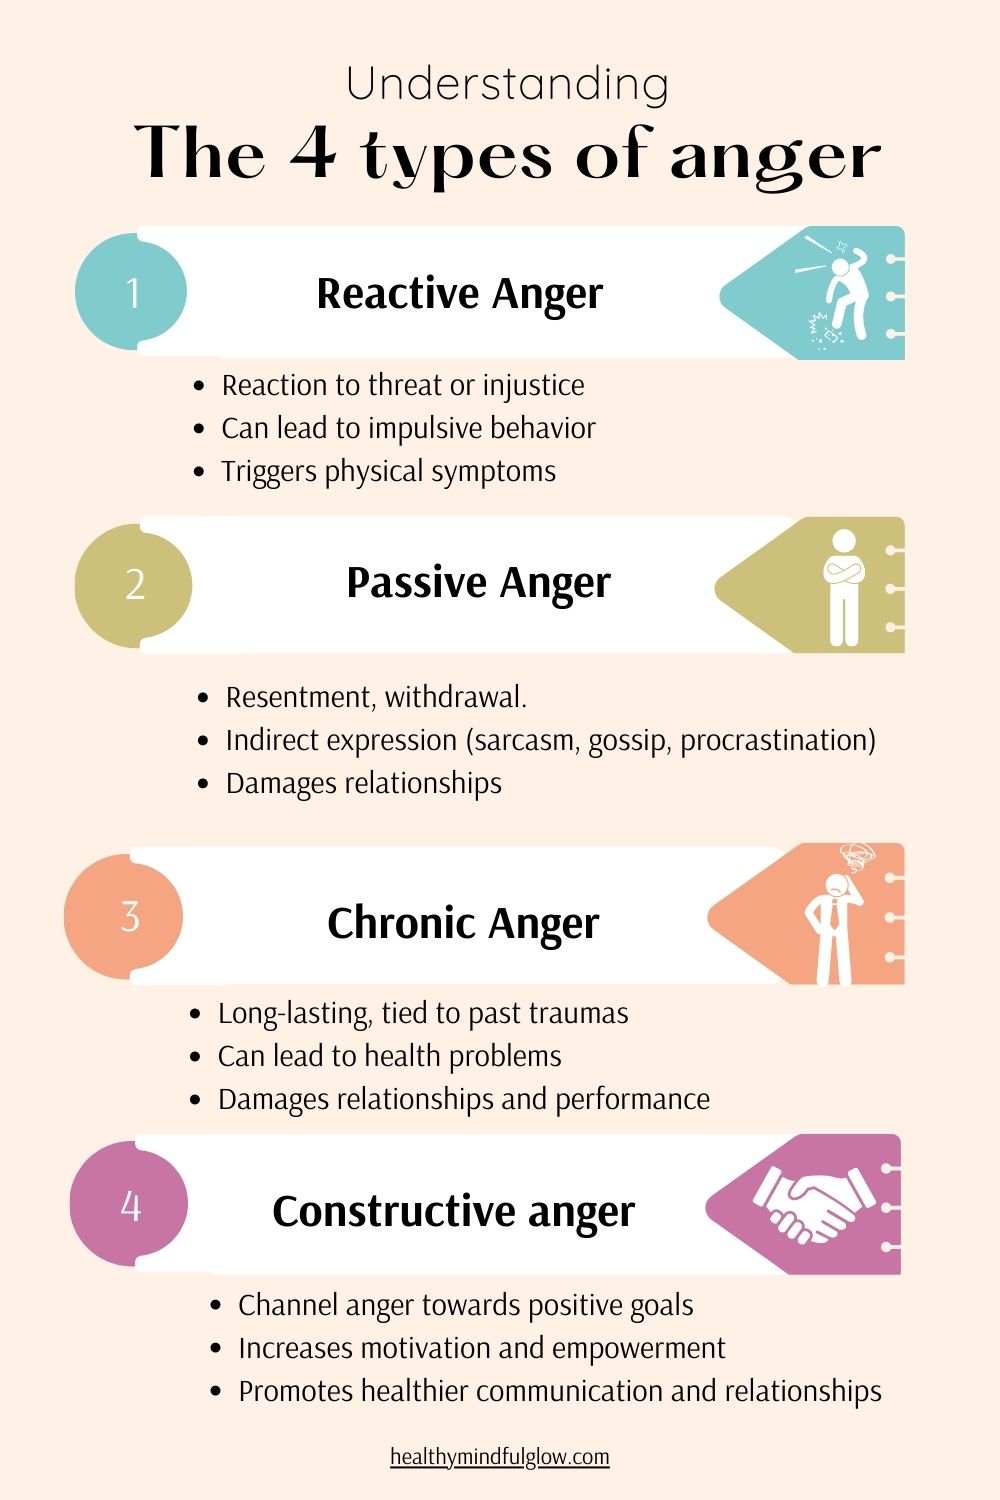 Infographic on understanding and identifying the 4 types of anger: reactive anger, passive anger, chronic anger and constructive anger